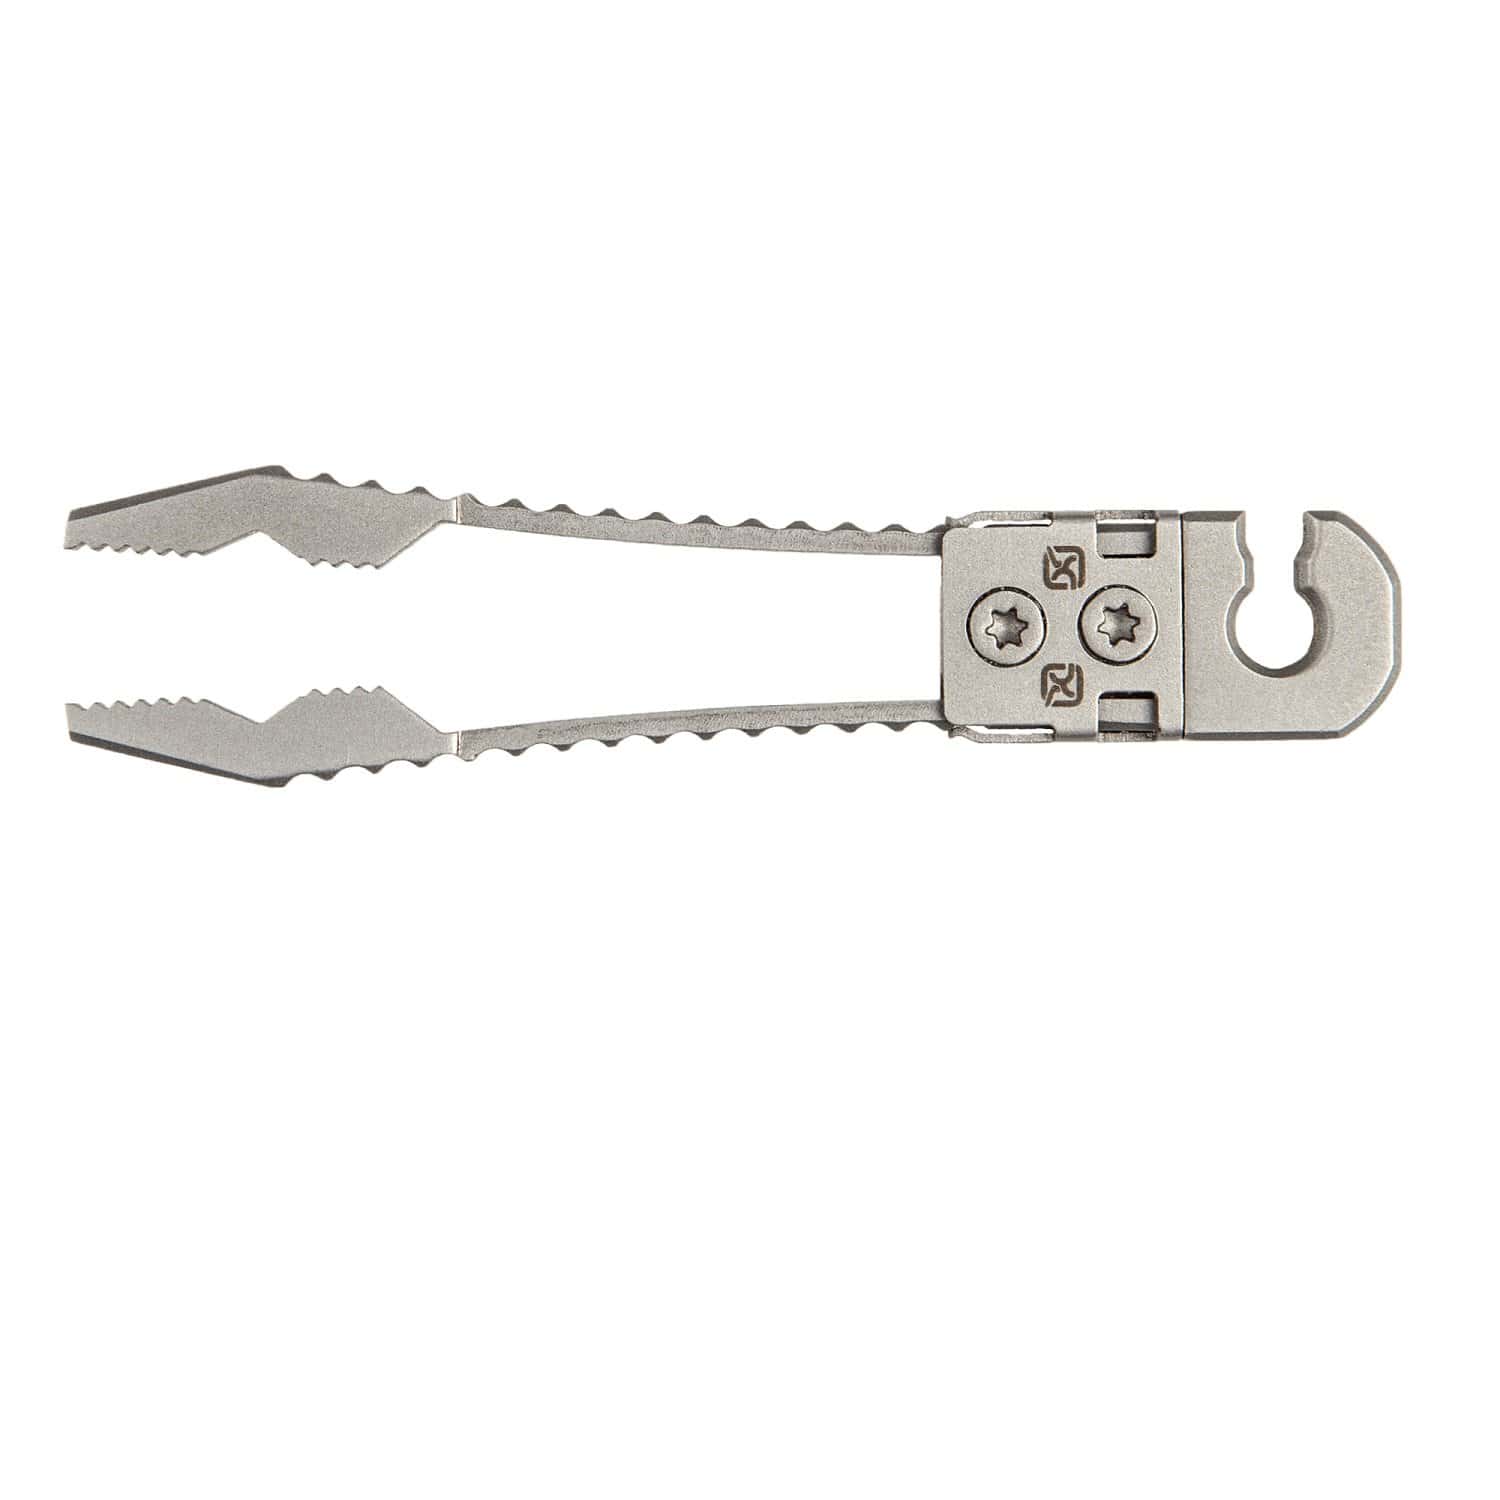 Klecker Knives Knives & Tools : Accessories Klecker Daily Carry Pliers